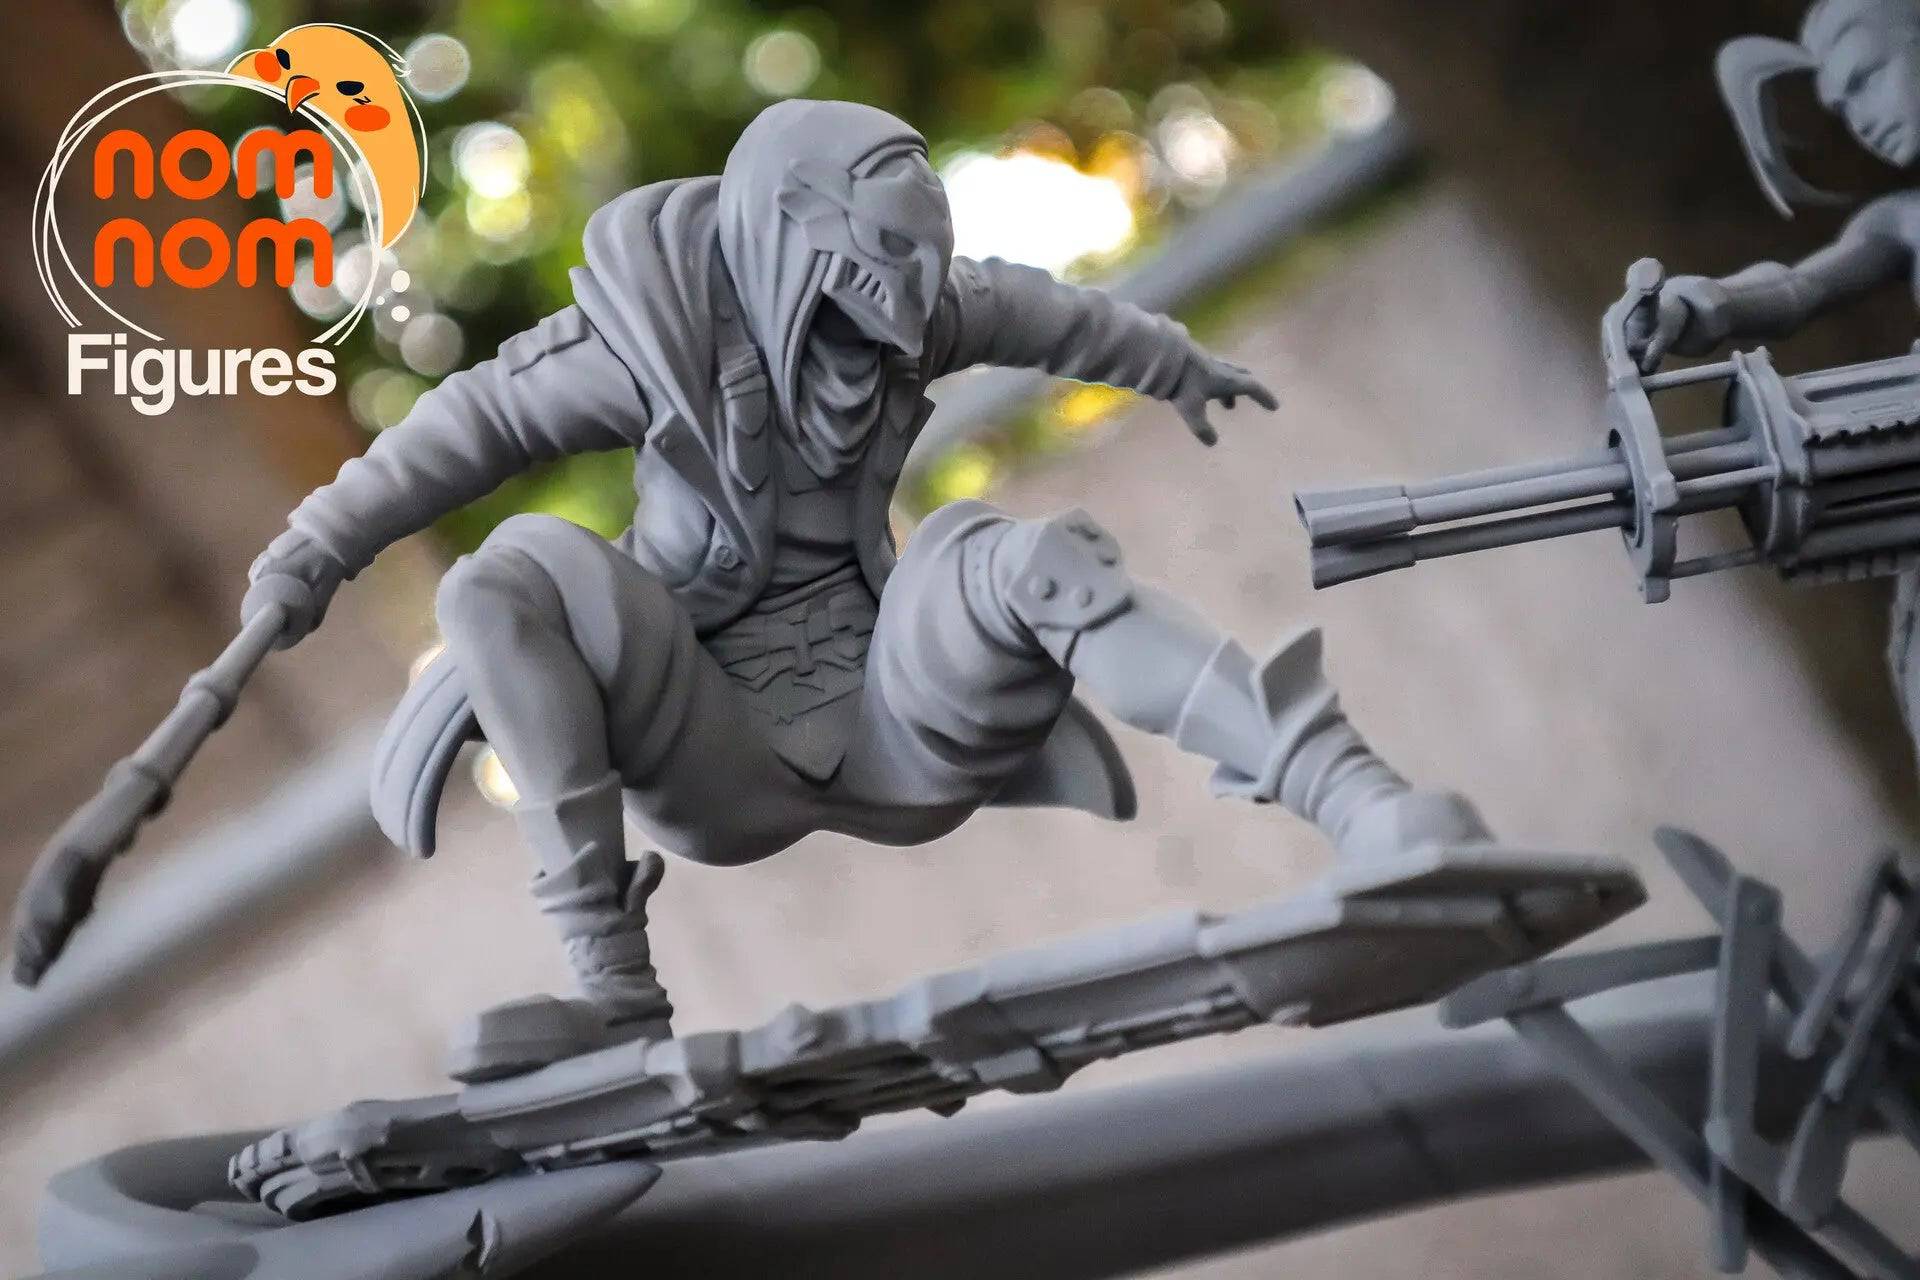 Loose Cannon (and A Little Man) | Resin Garage Kit Sculpture Anime Video Game Fan Art Statue | Nomnom Figures - Tattles Told 3D